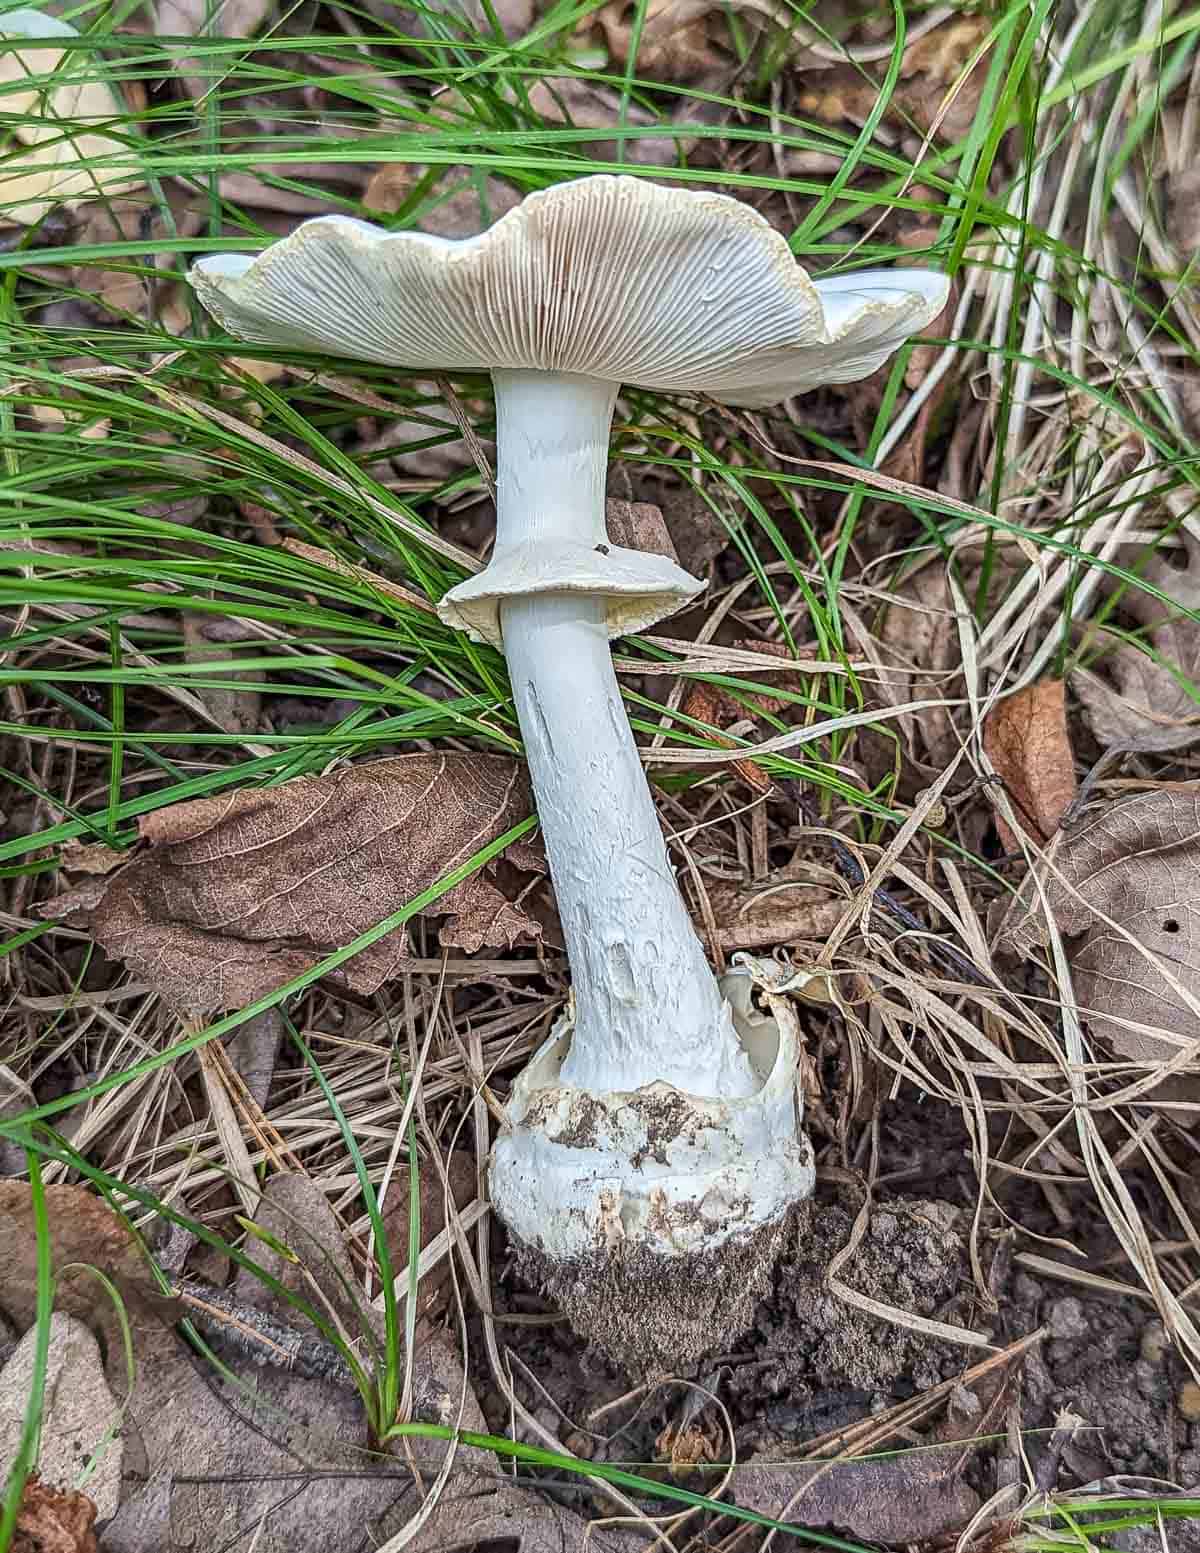 A picture of a mature destroying angel mushroom.